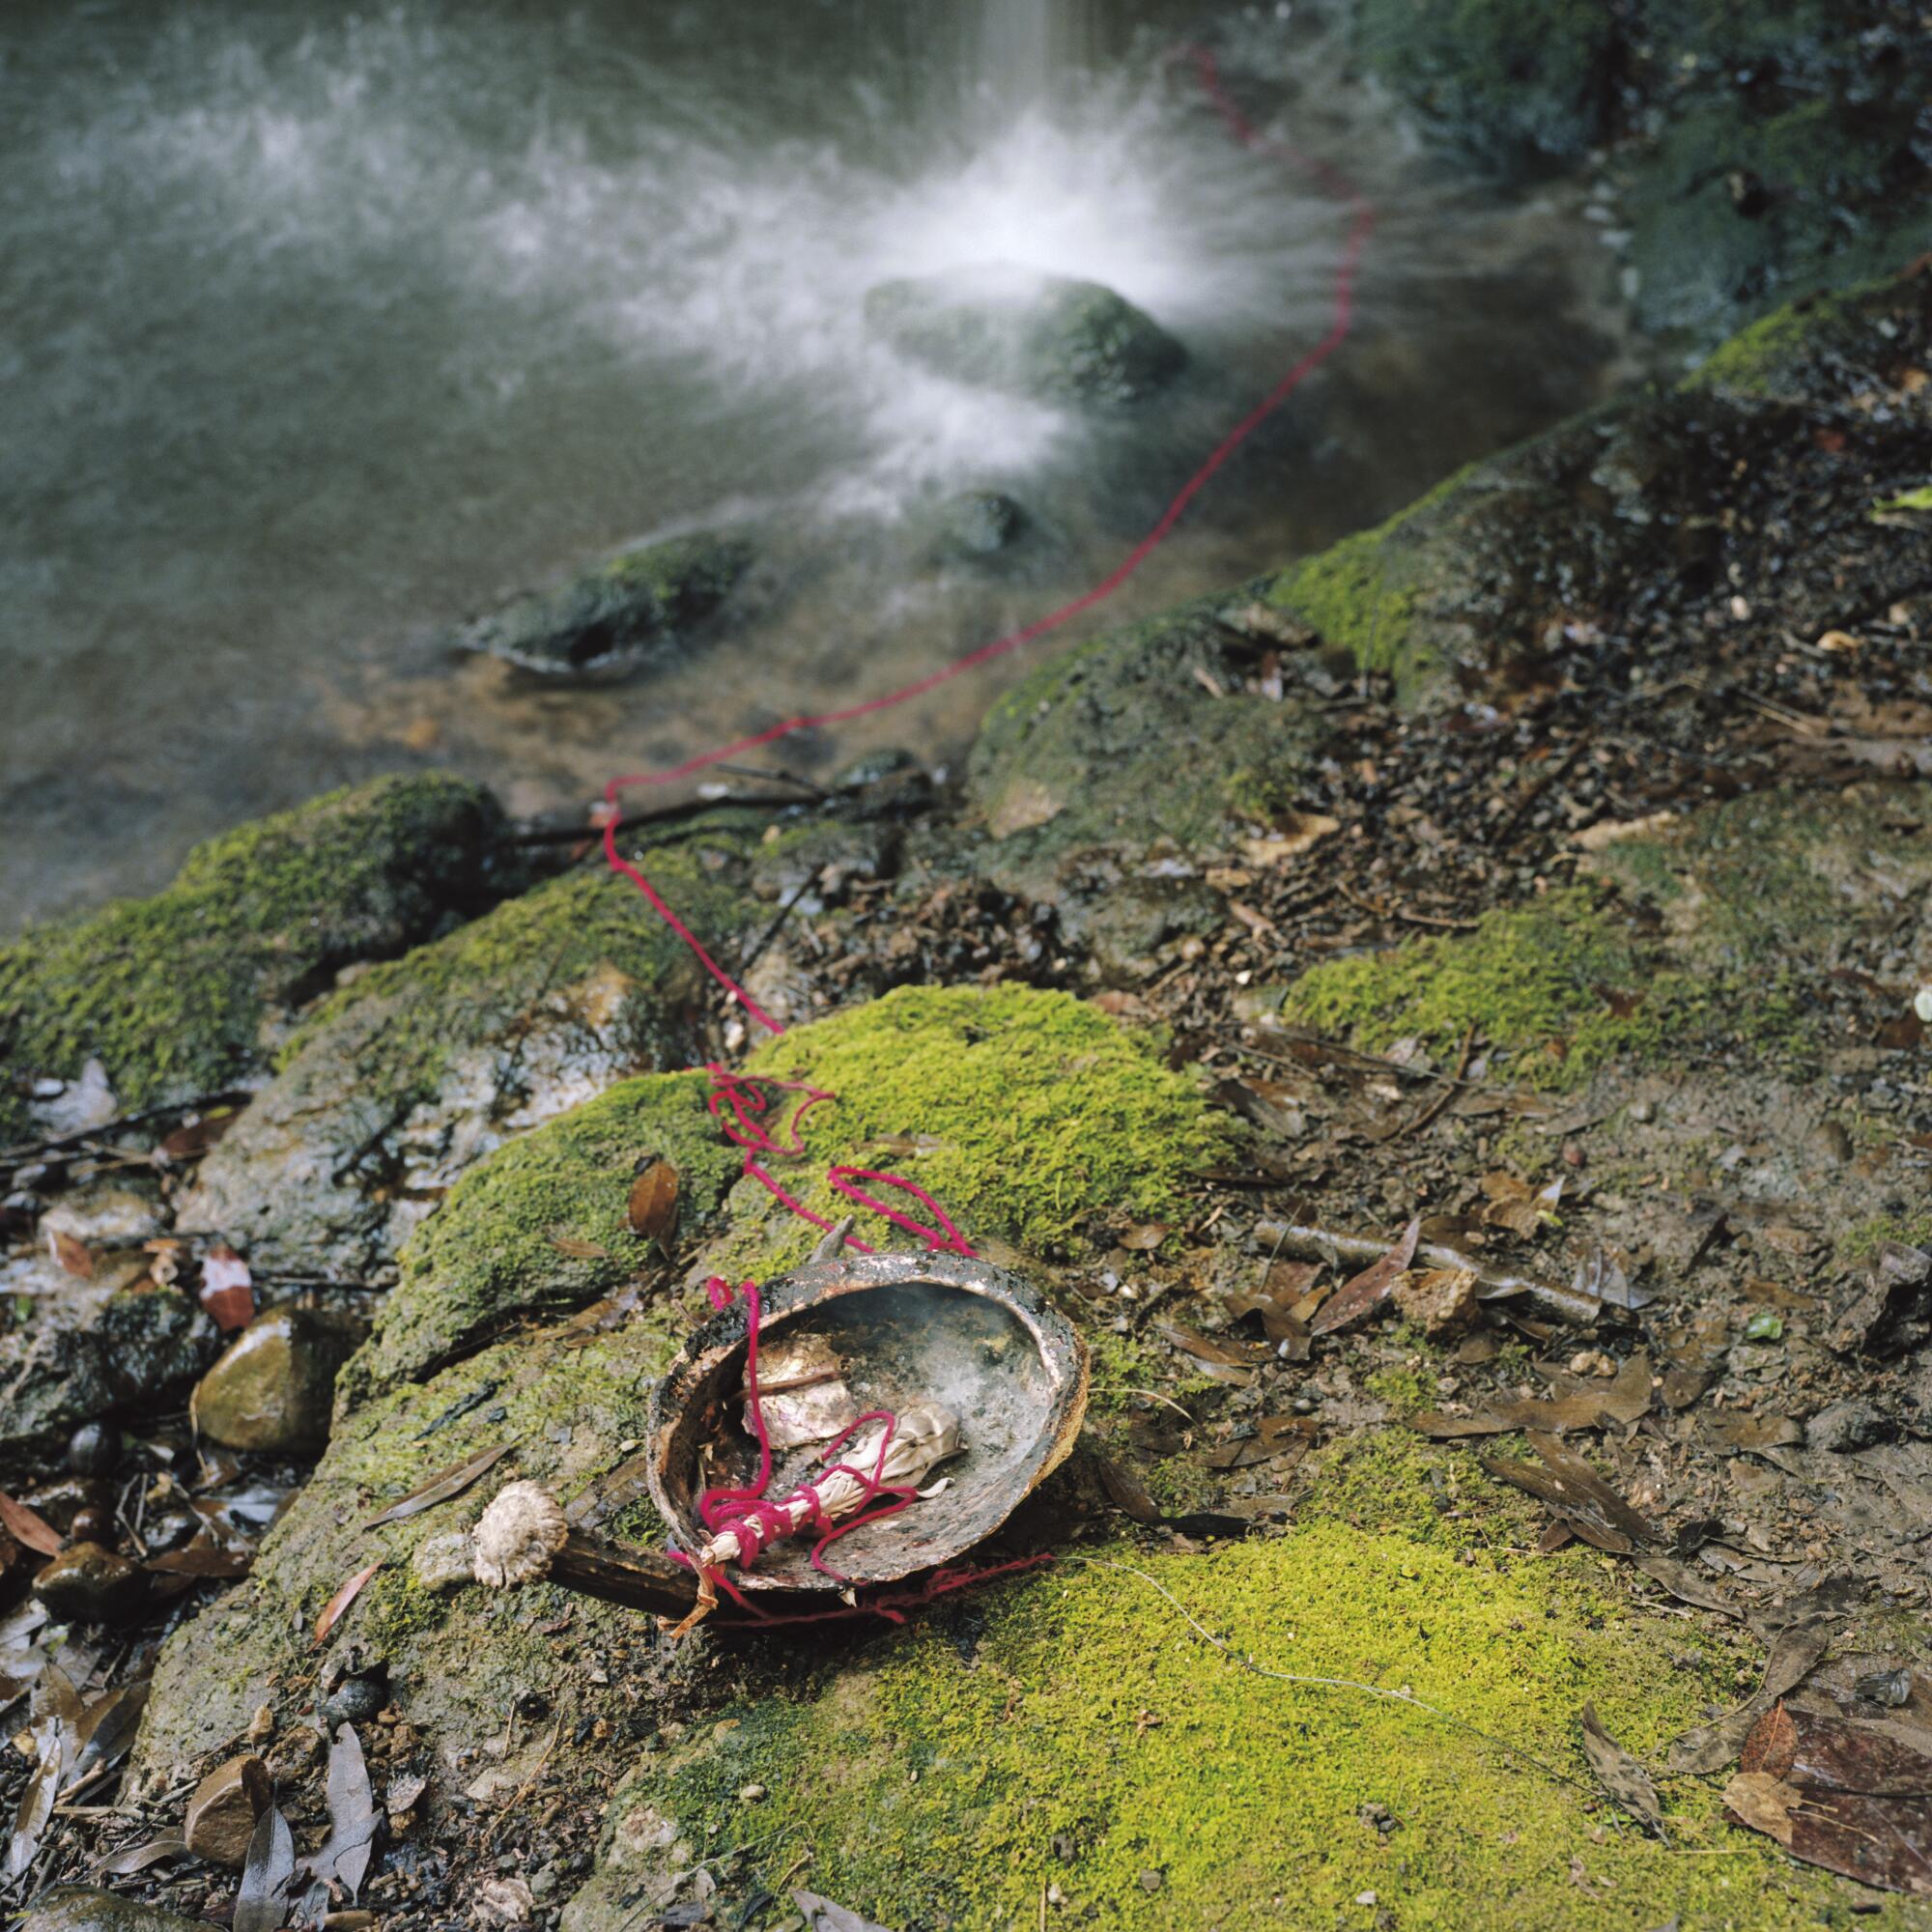 A color photograph shows an abalone shell bearing a sage bundle, connecting to a red thread that dips down into water.